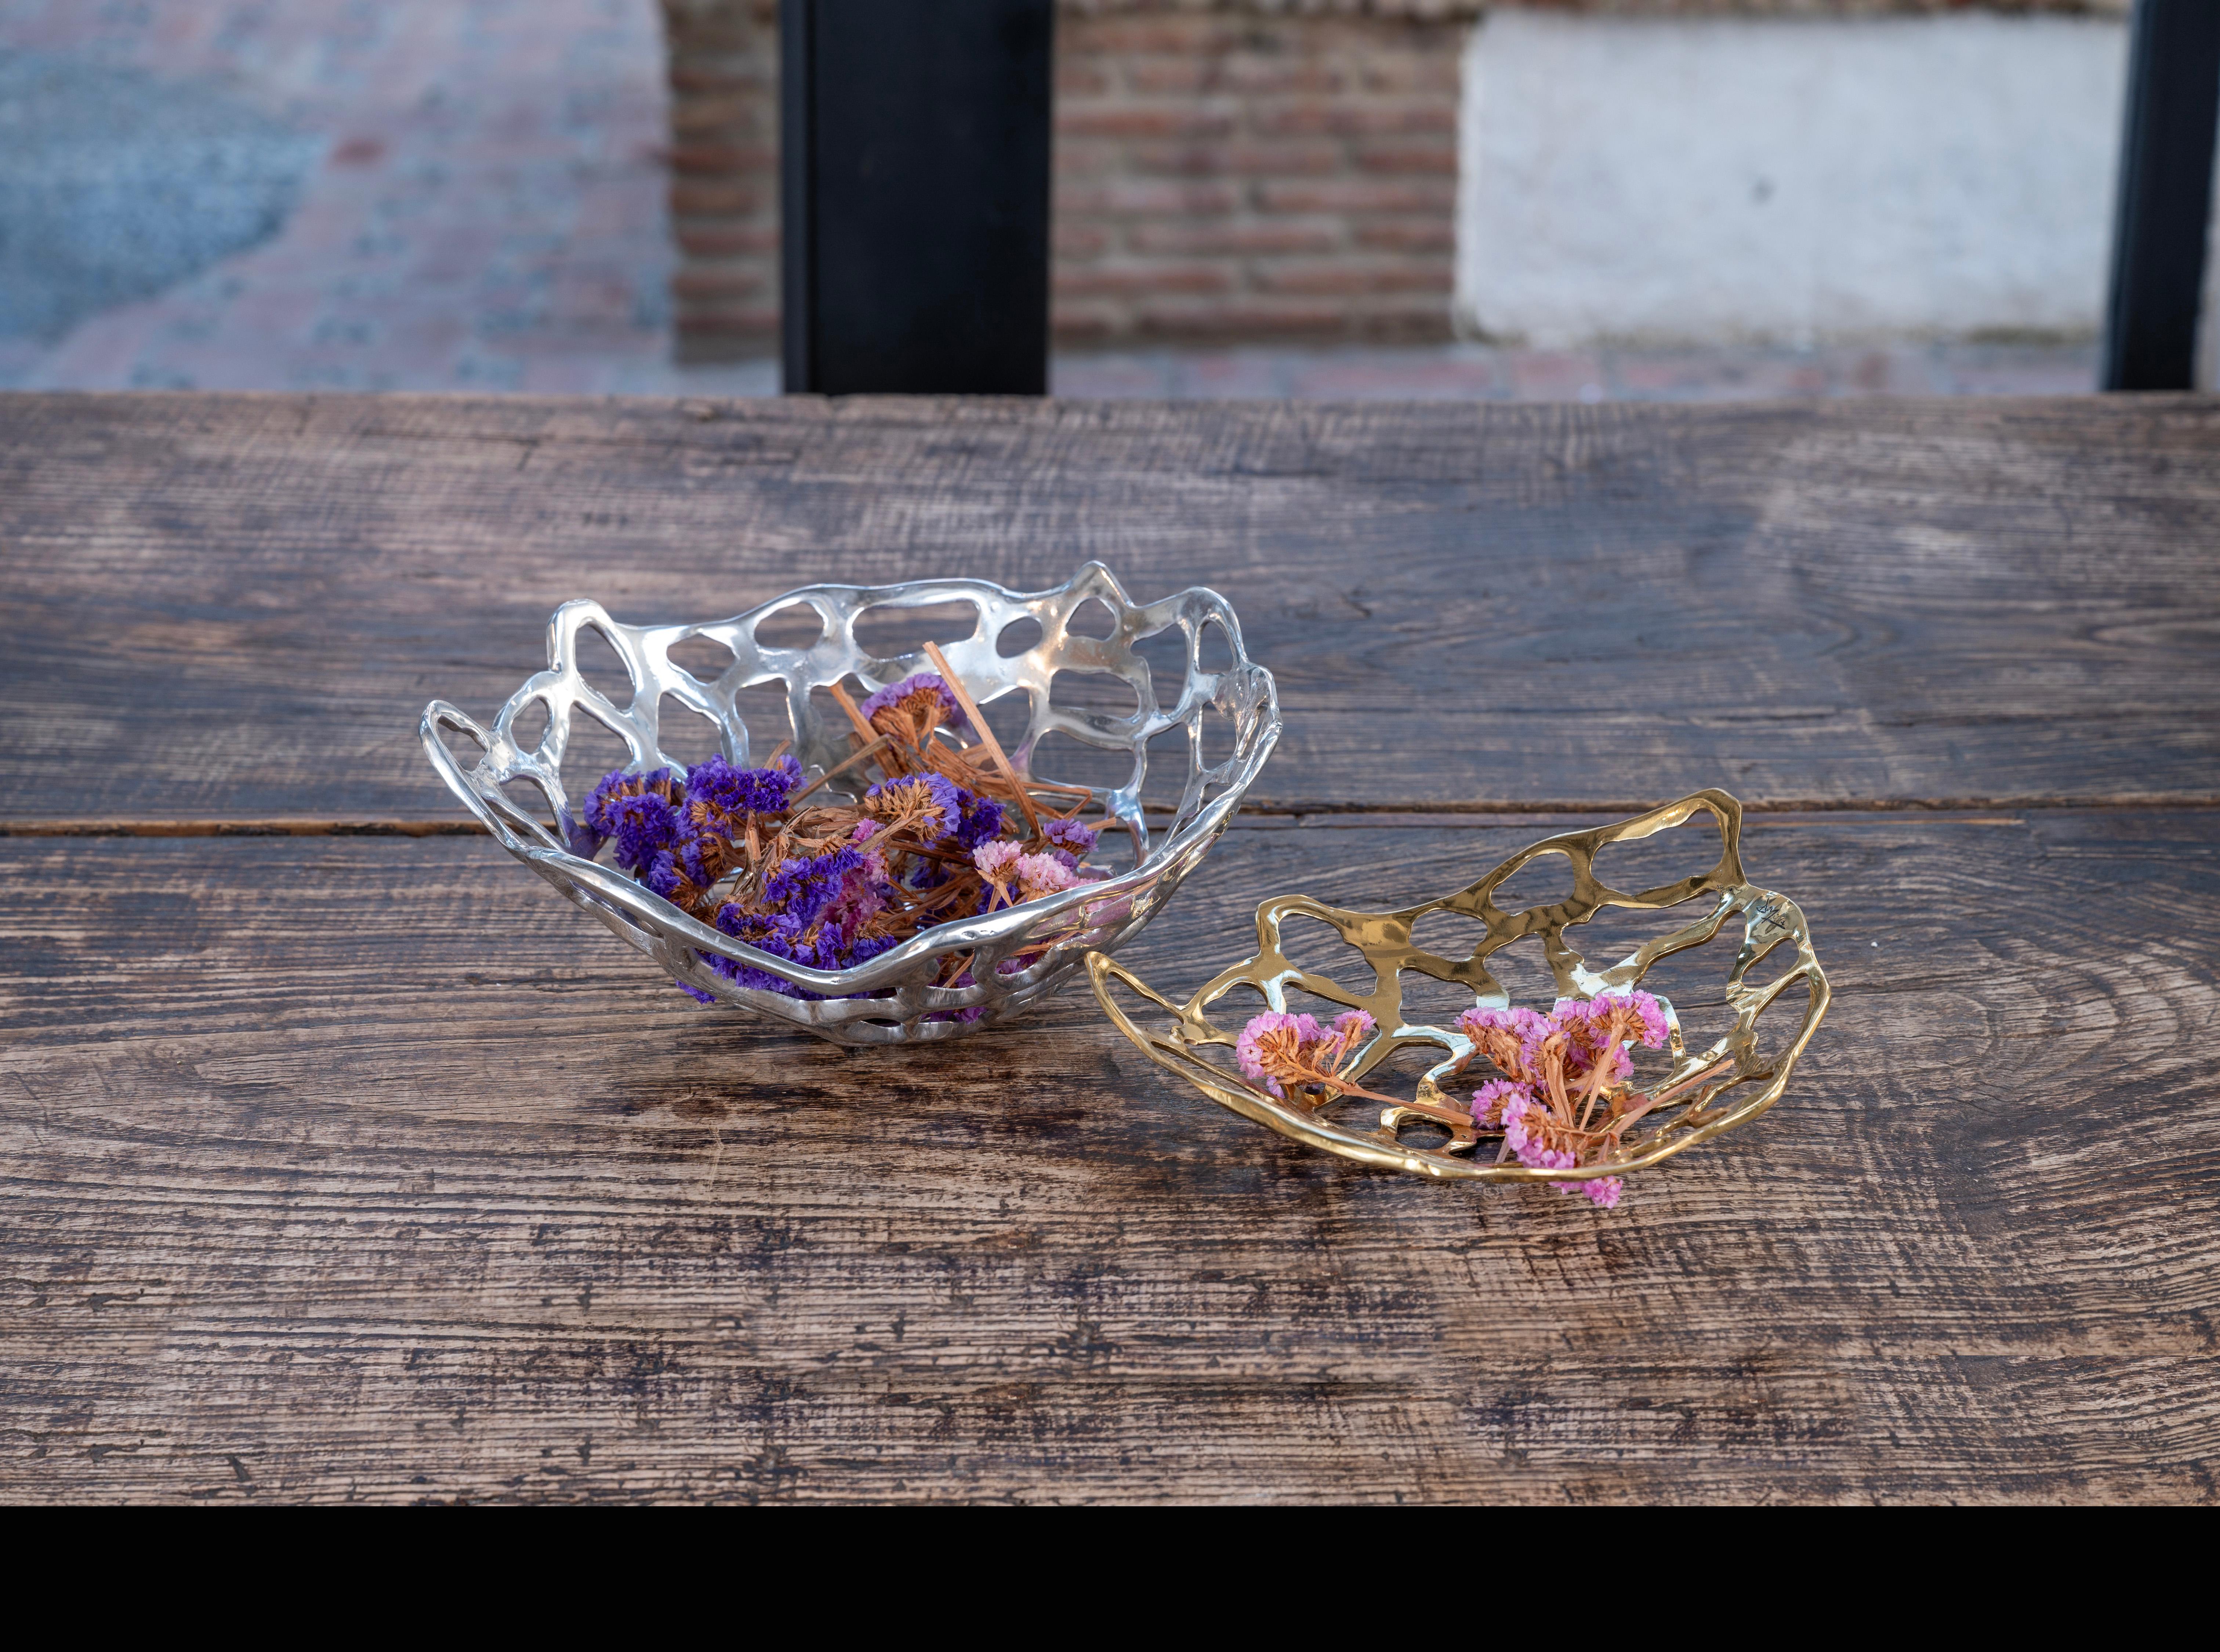 The decorative Oval Bowl was created by David Marshall, it is made of sand cast aluminum and sand cast brass.
Handmade, mounted and finished in our foundry and workshop in Spain from recycled materials.
Certified authentic by the Artist David